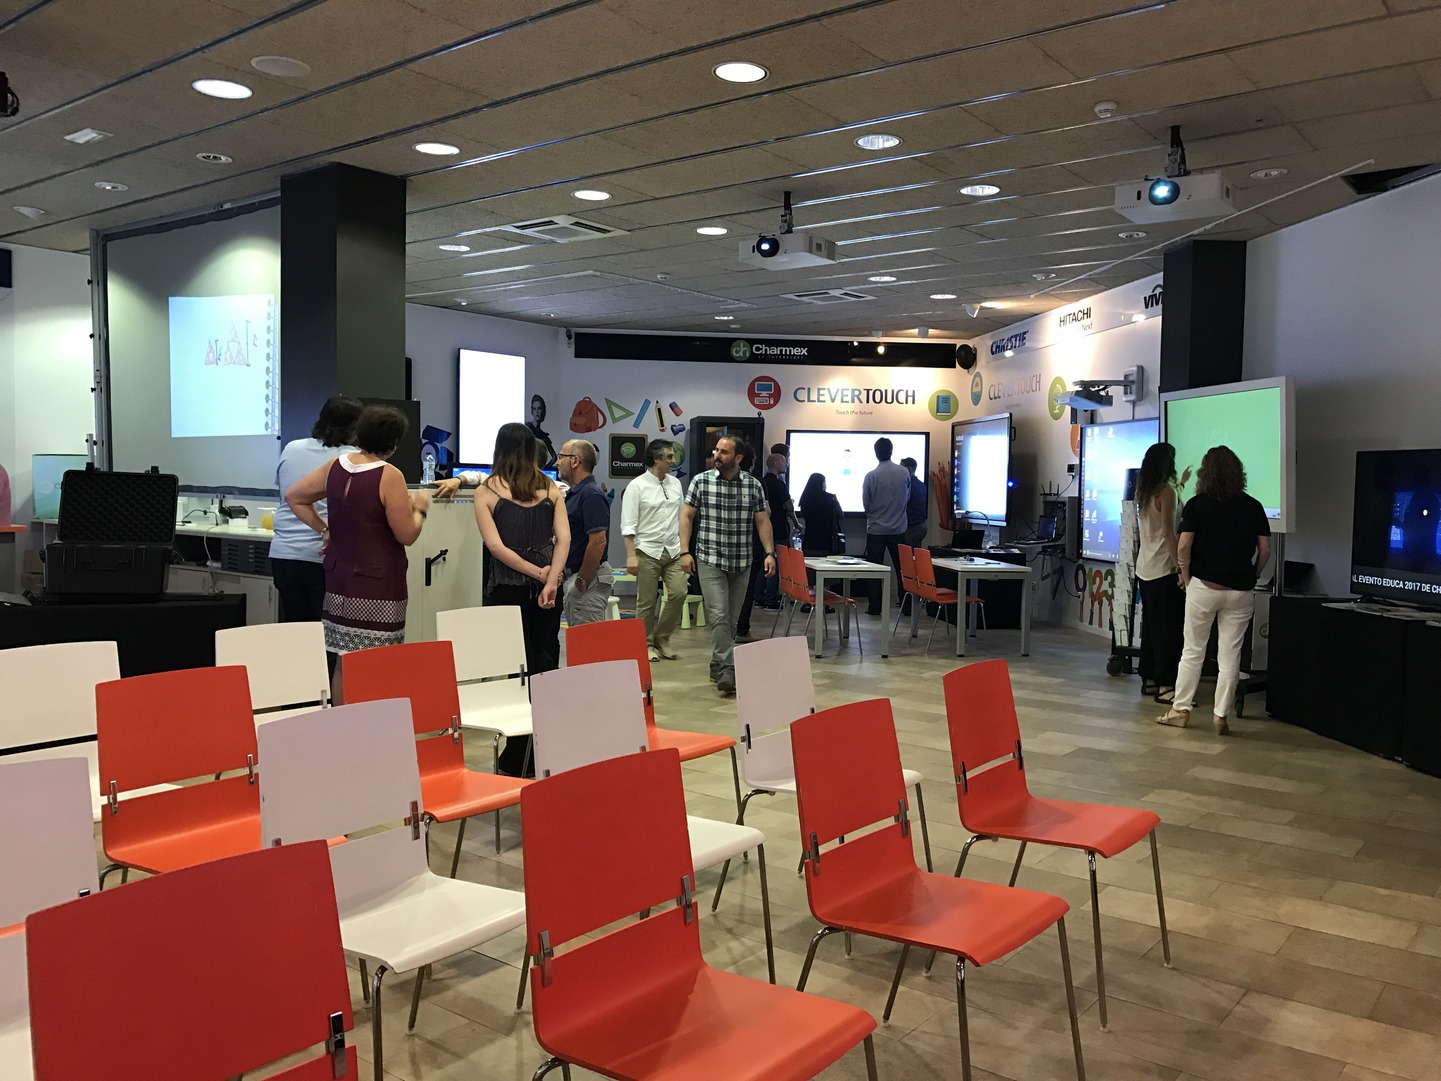 Charmex shows the latest AV solutions for the educational sector in its Barcelona showroom